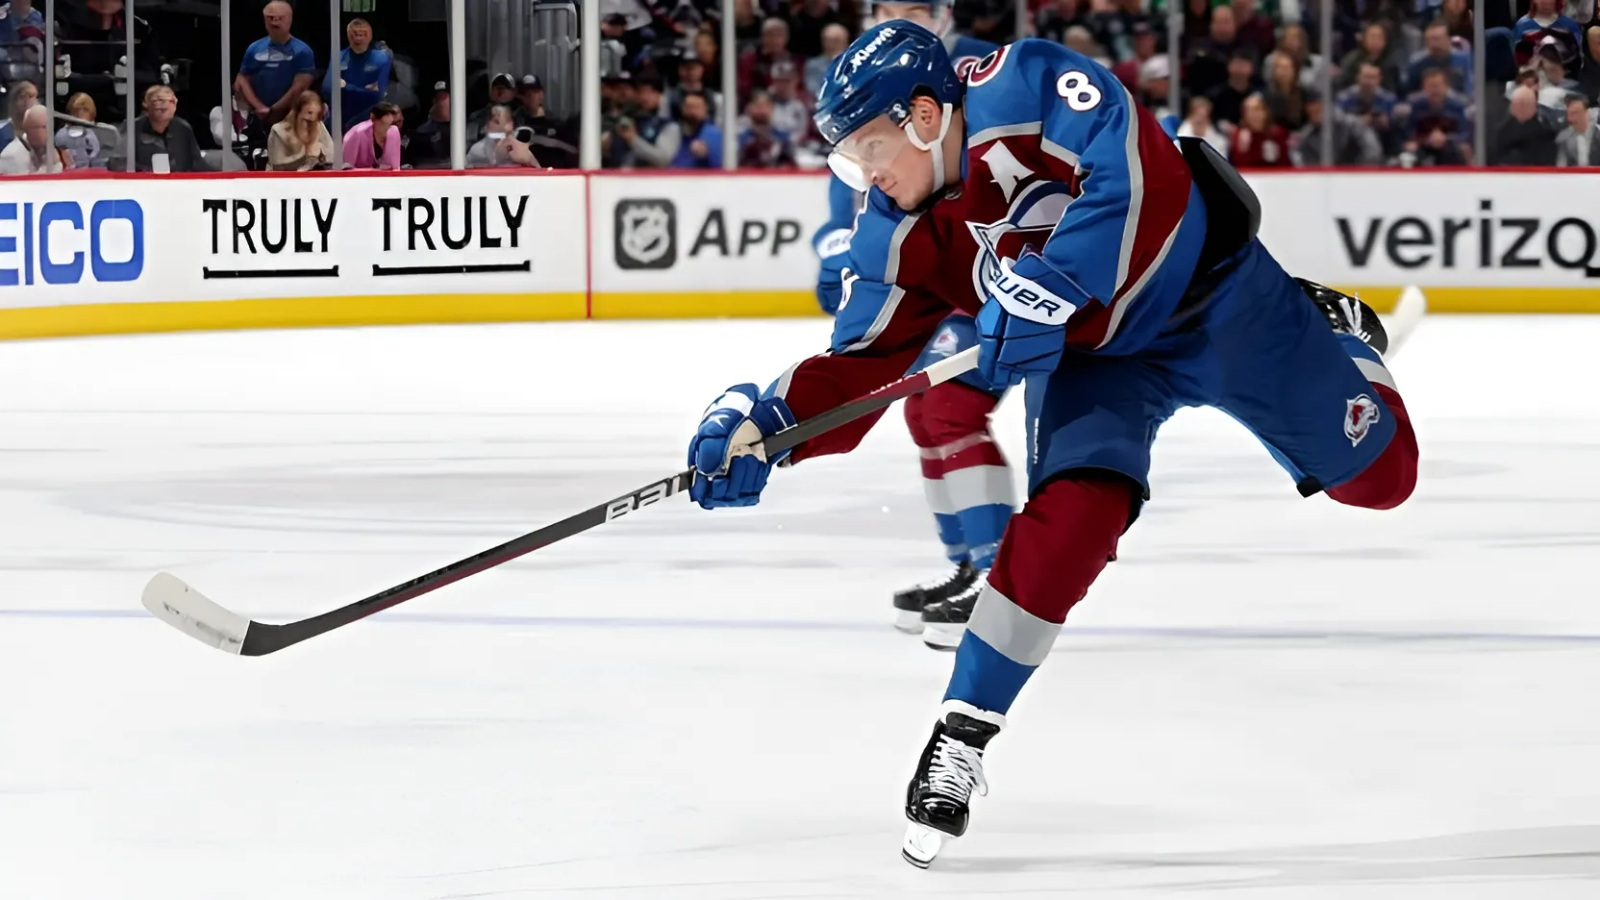 Injured Avalanche needed break, but healthy ones won't get rusty as they await next foe: “We're going to go to work”